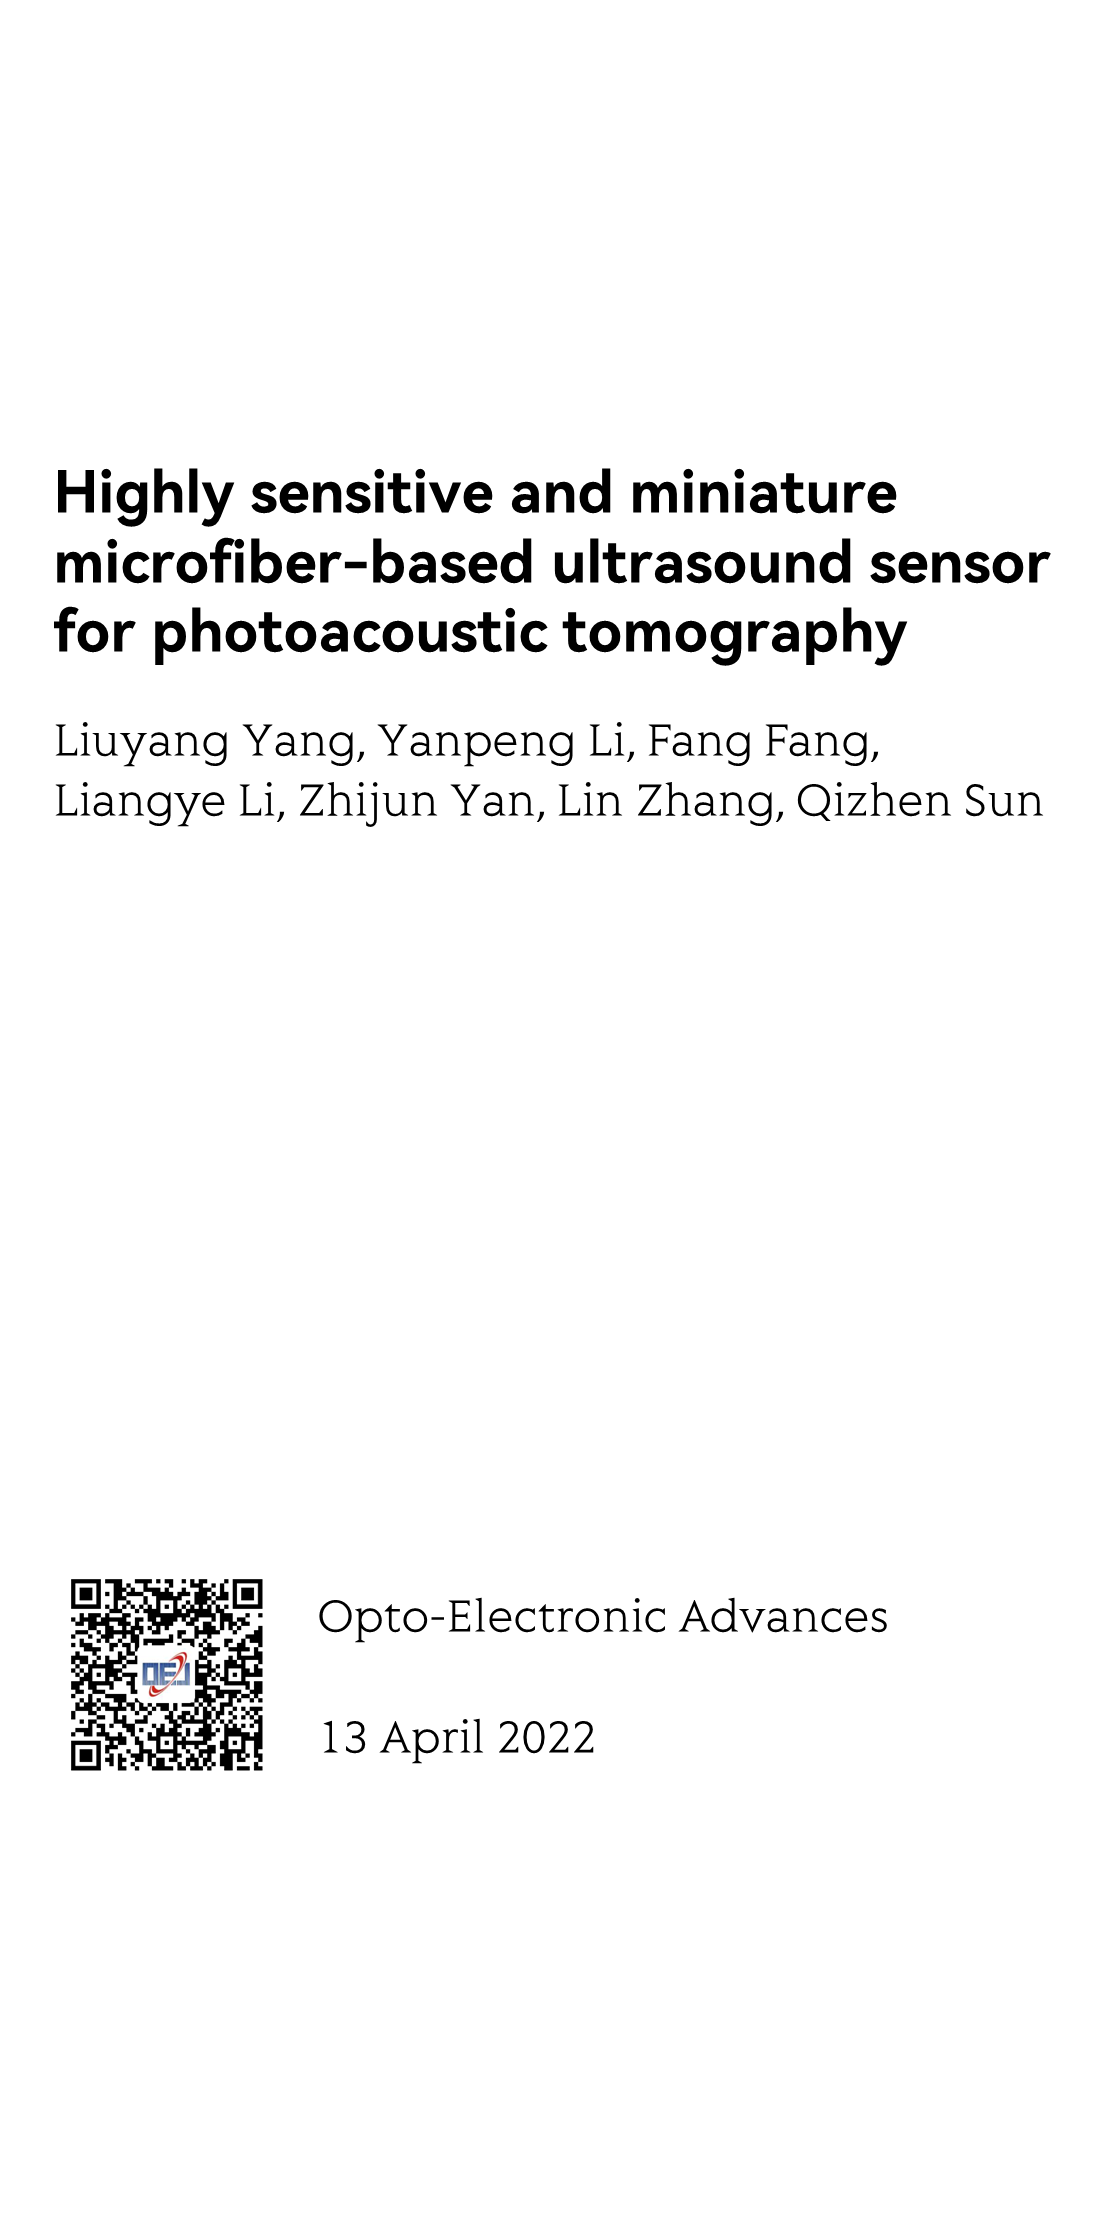 Highly sensitive and miniature microfiber-based ultrasound sensor for photoacoustic tomography_1